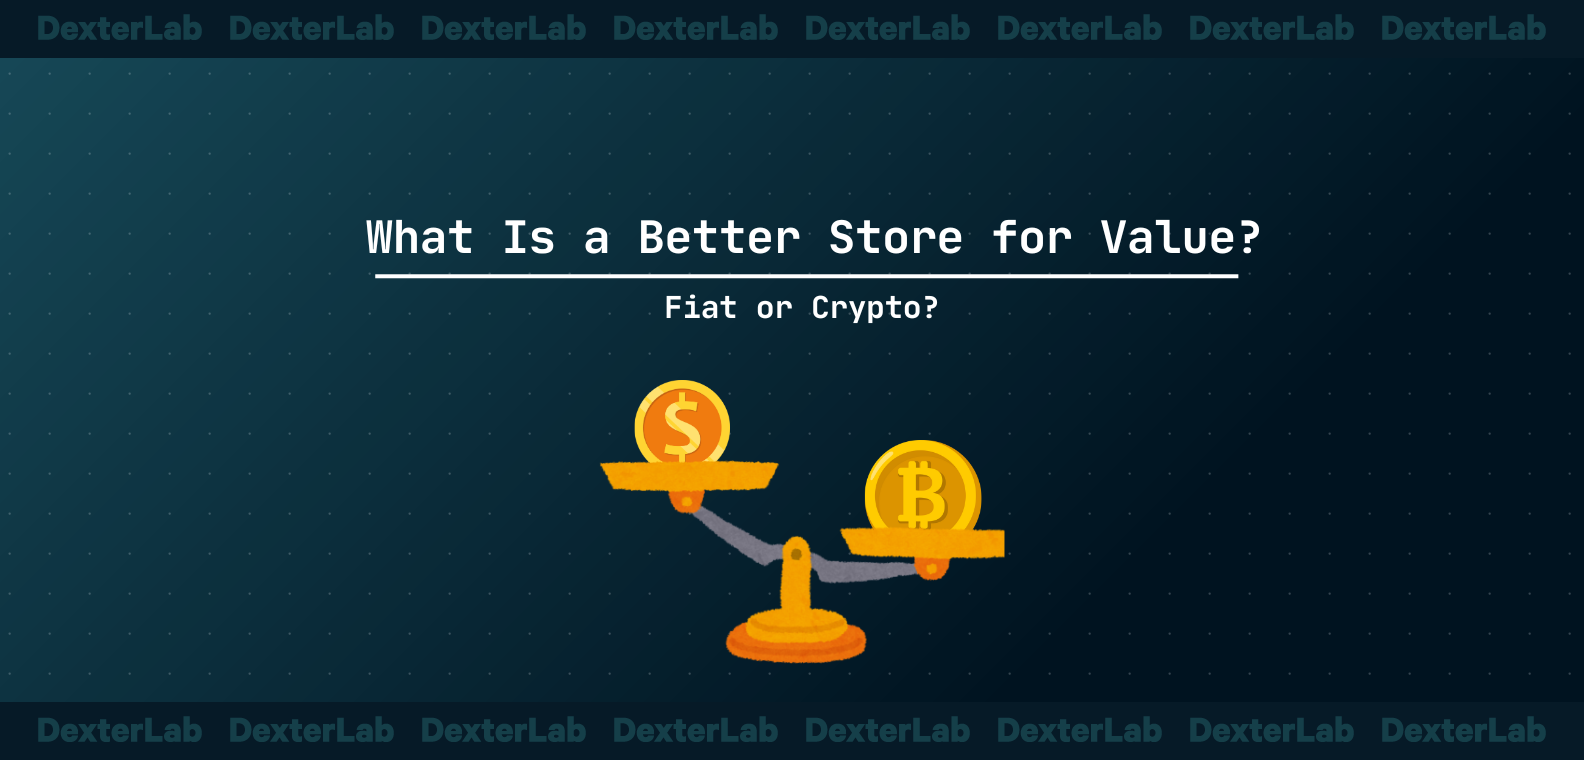 What Is a Better Store for Value? Fiat or Crypto?